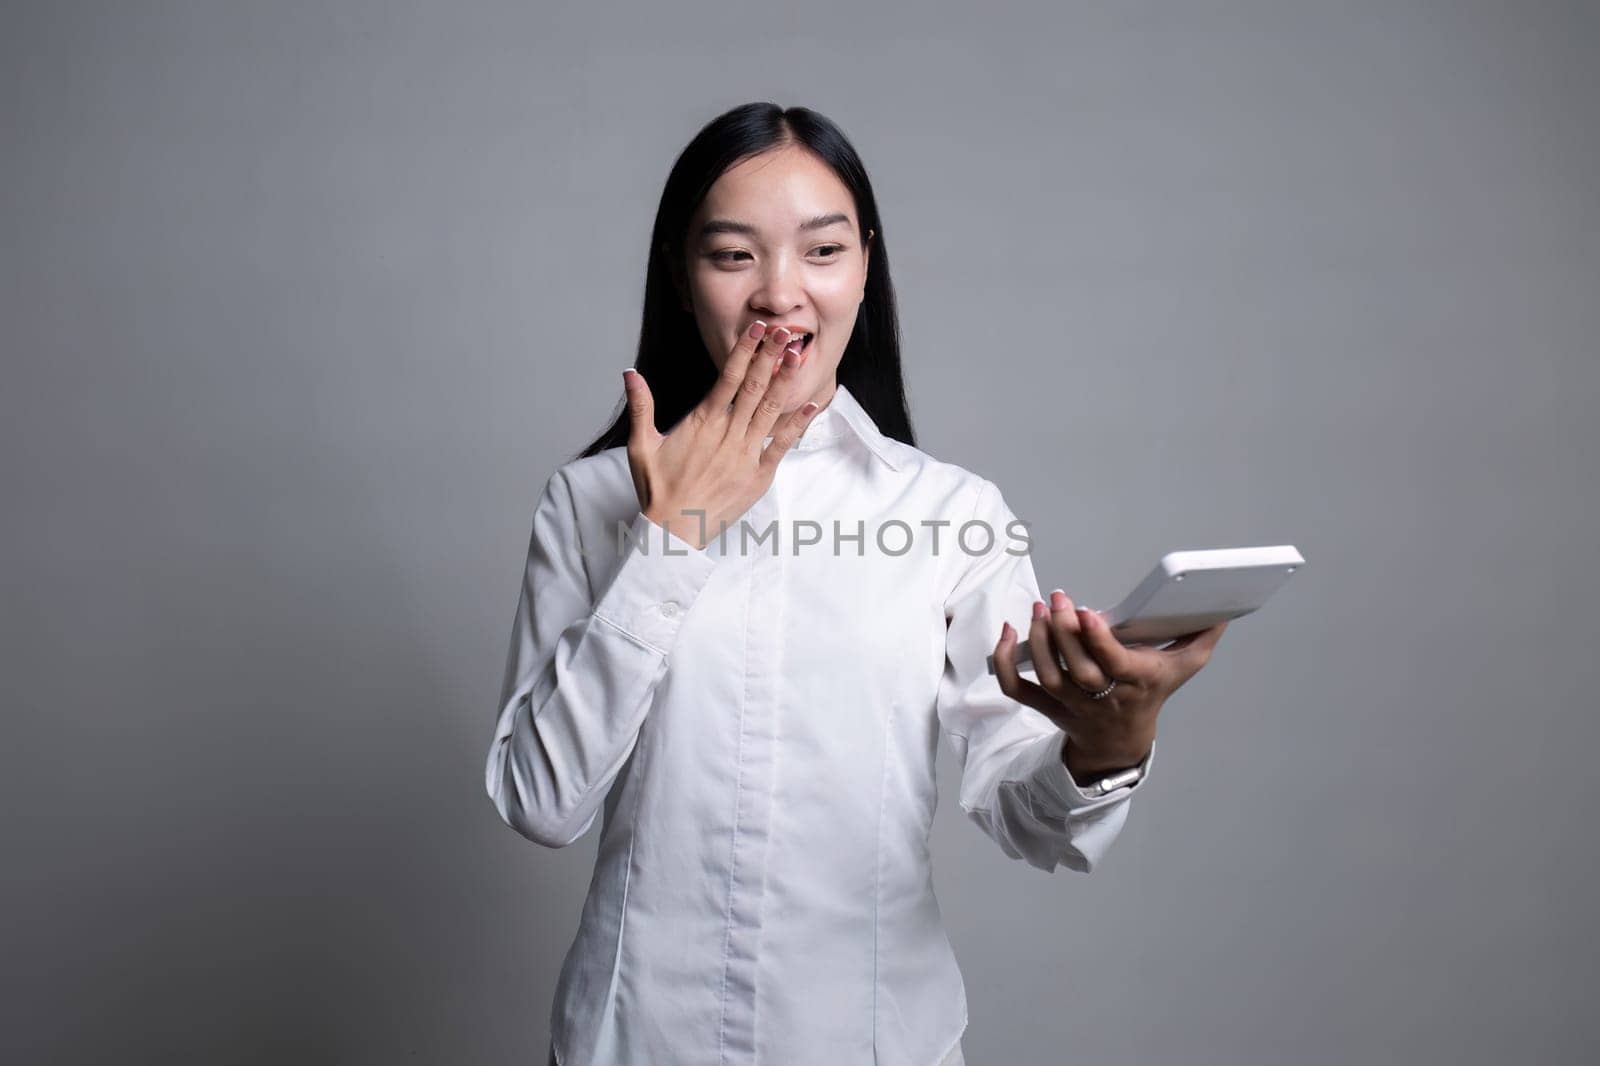 Portrait of a young accountant woman holding a calculator on a flat white background..